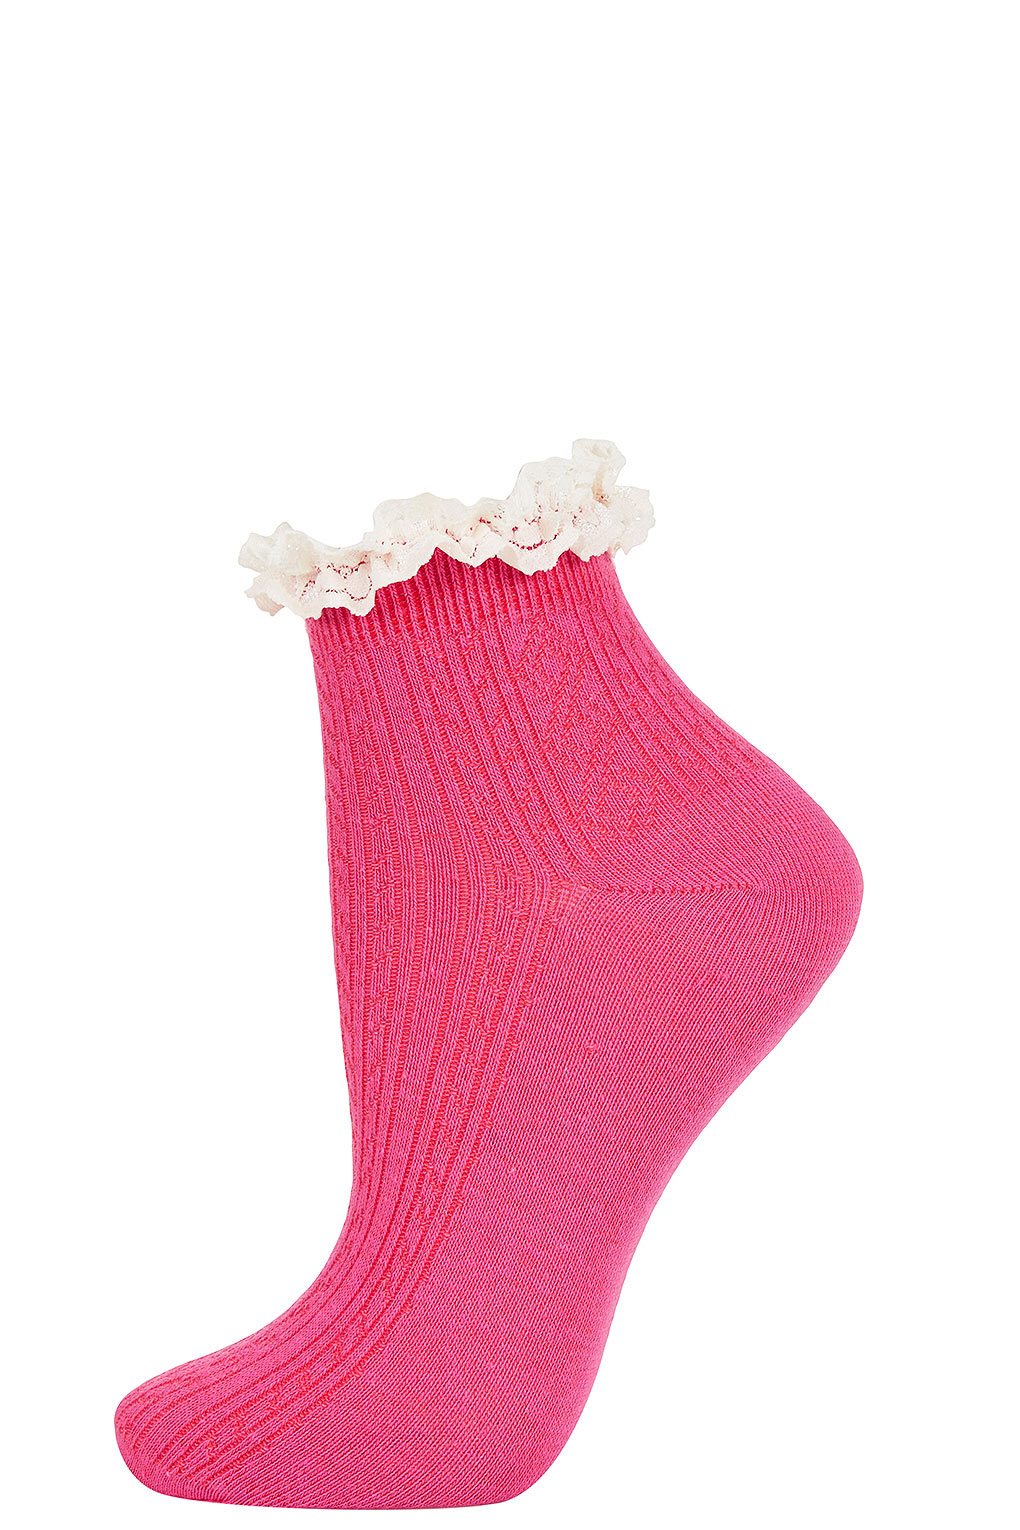 Topshop Pink Lace Trim Ankle Socks in Pink (powder pink) | Lyst